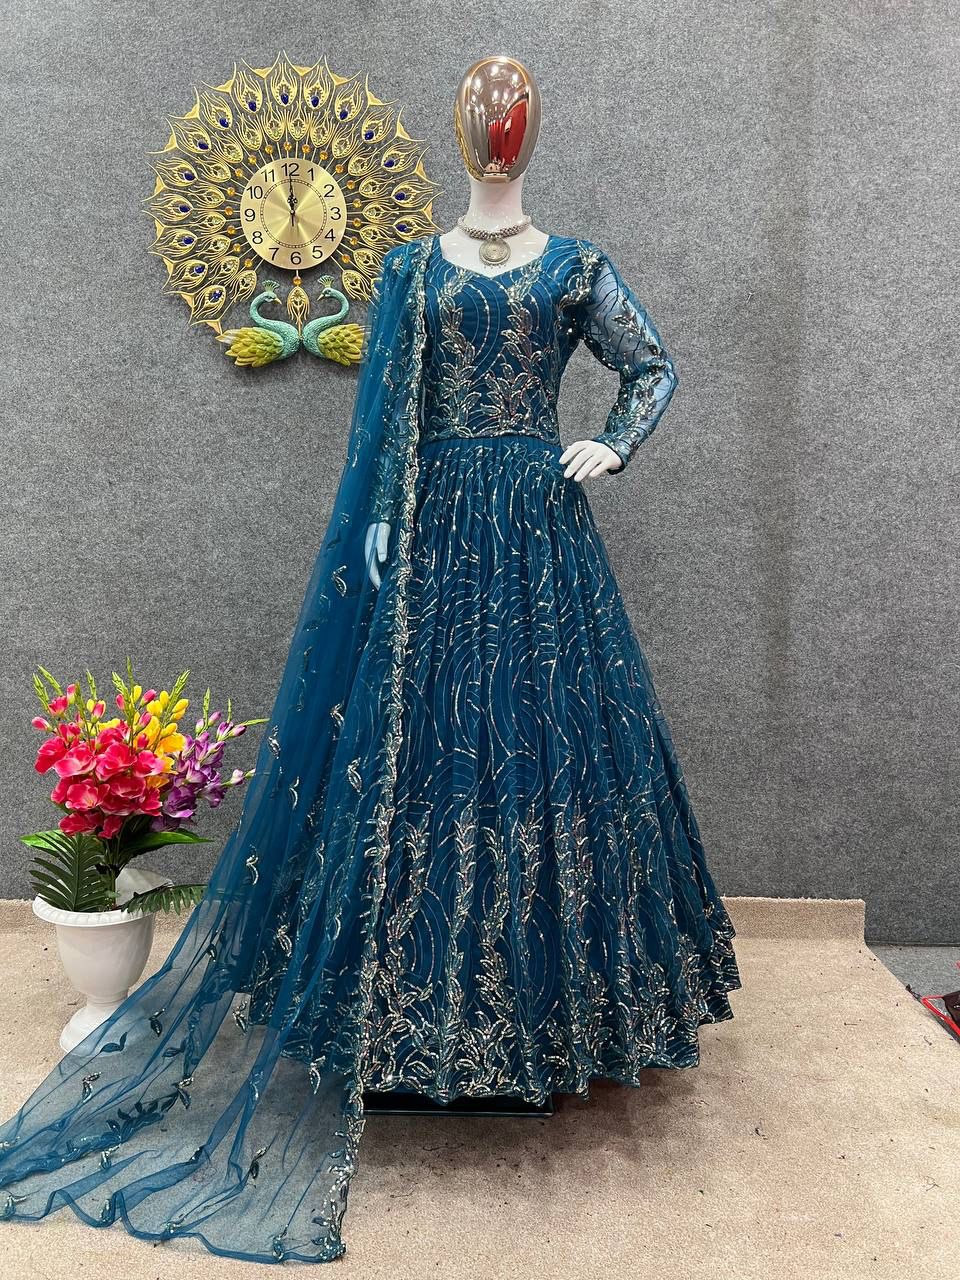 Royal Blue Satin Flower Girl Dress For Wedding, Party, First Communion  Cinderella Style With Princess Inspired Evening Gown Royal Blue Design  Style 262d From E300l, $40.91 | DHgate.Com